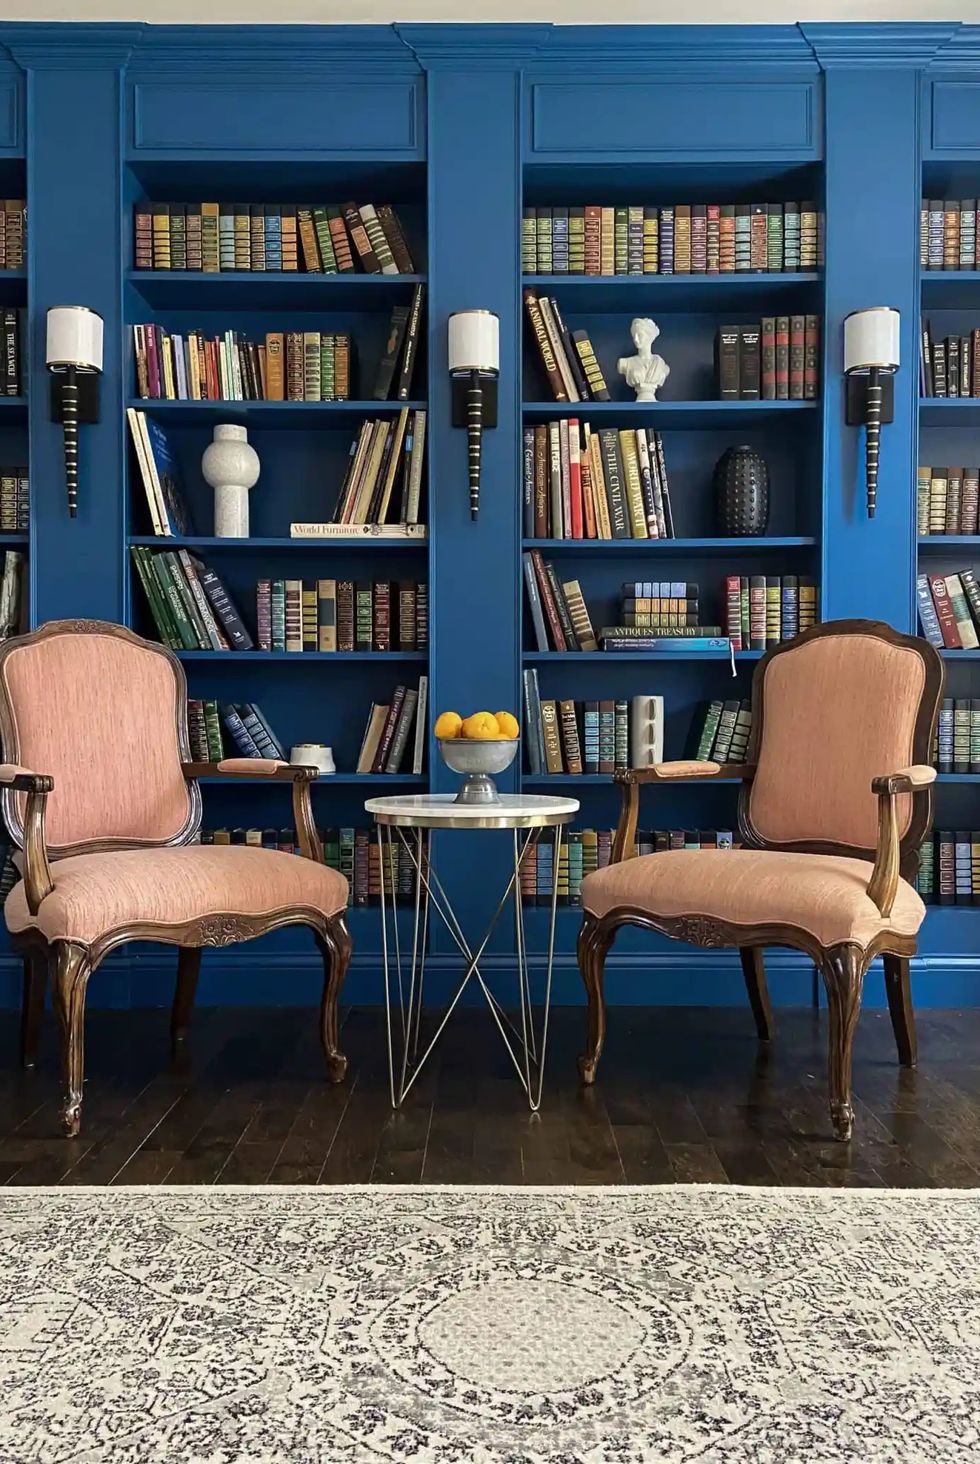 some chairs in front of the bookshelf